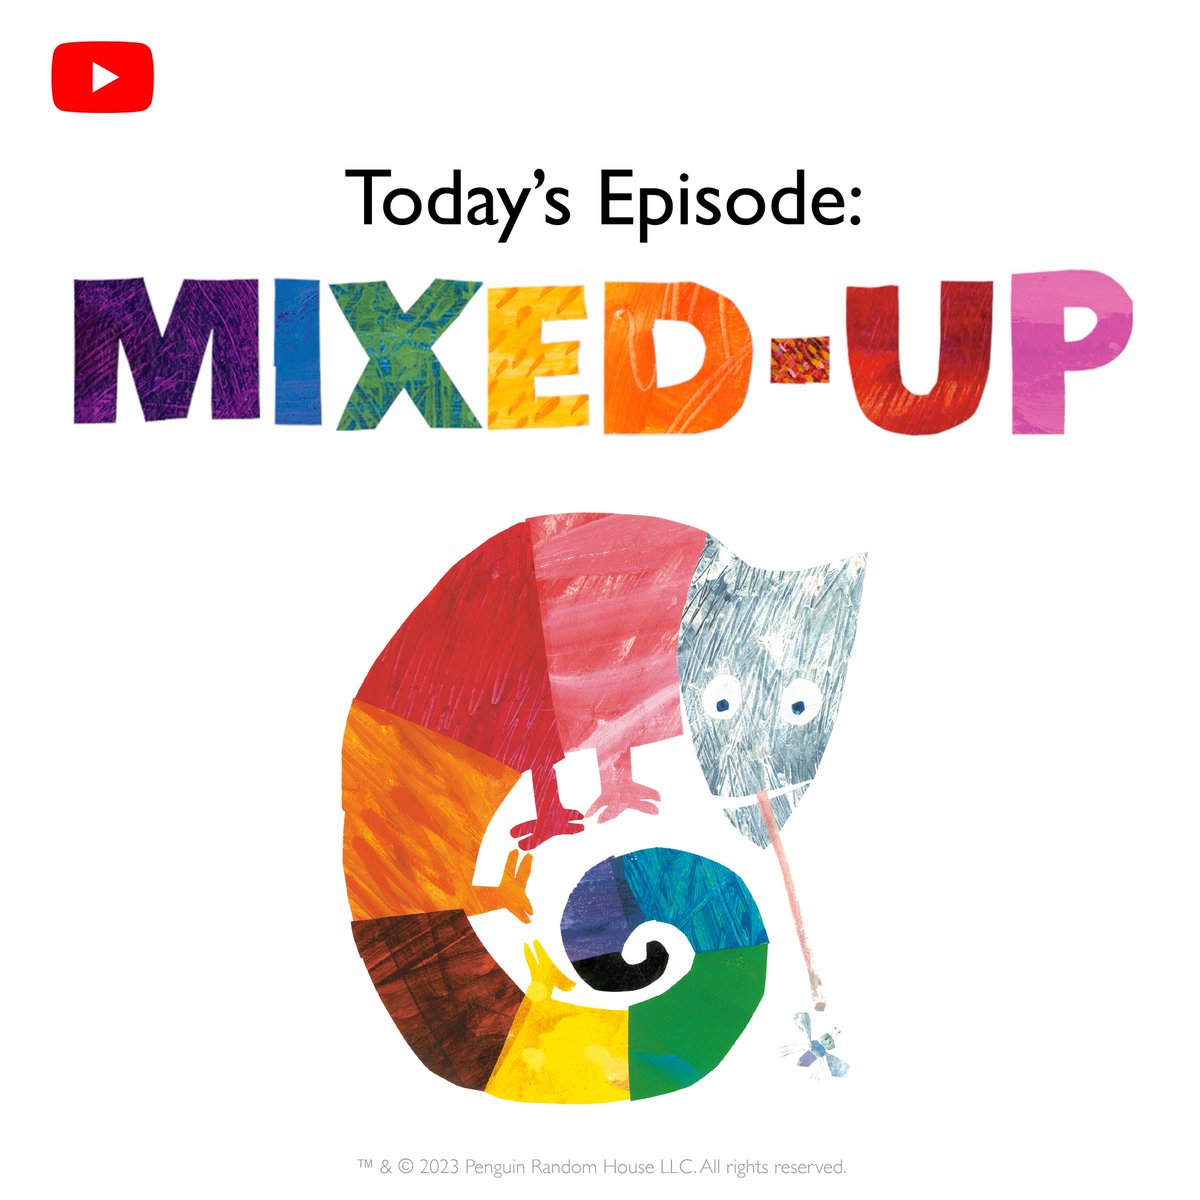 Today’s World of Eric Carle YouTube episode is all MIXED-UP! This episode includes a full storytime read-aloud of The Mixed-Up Chameleon, first published in 1975. Watch the episode here: youtu.be/Y7b7GV3iCT4